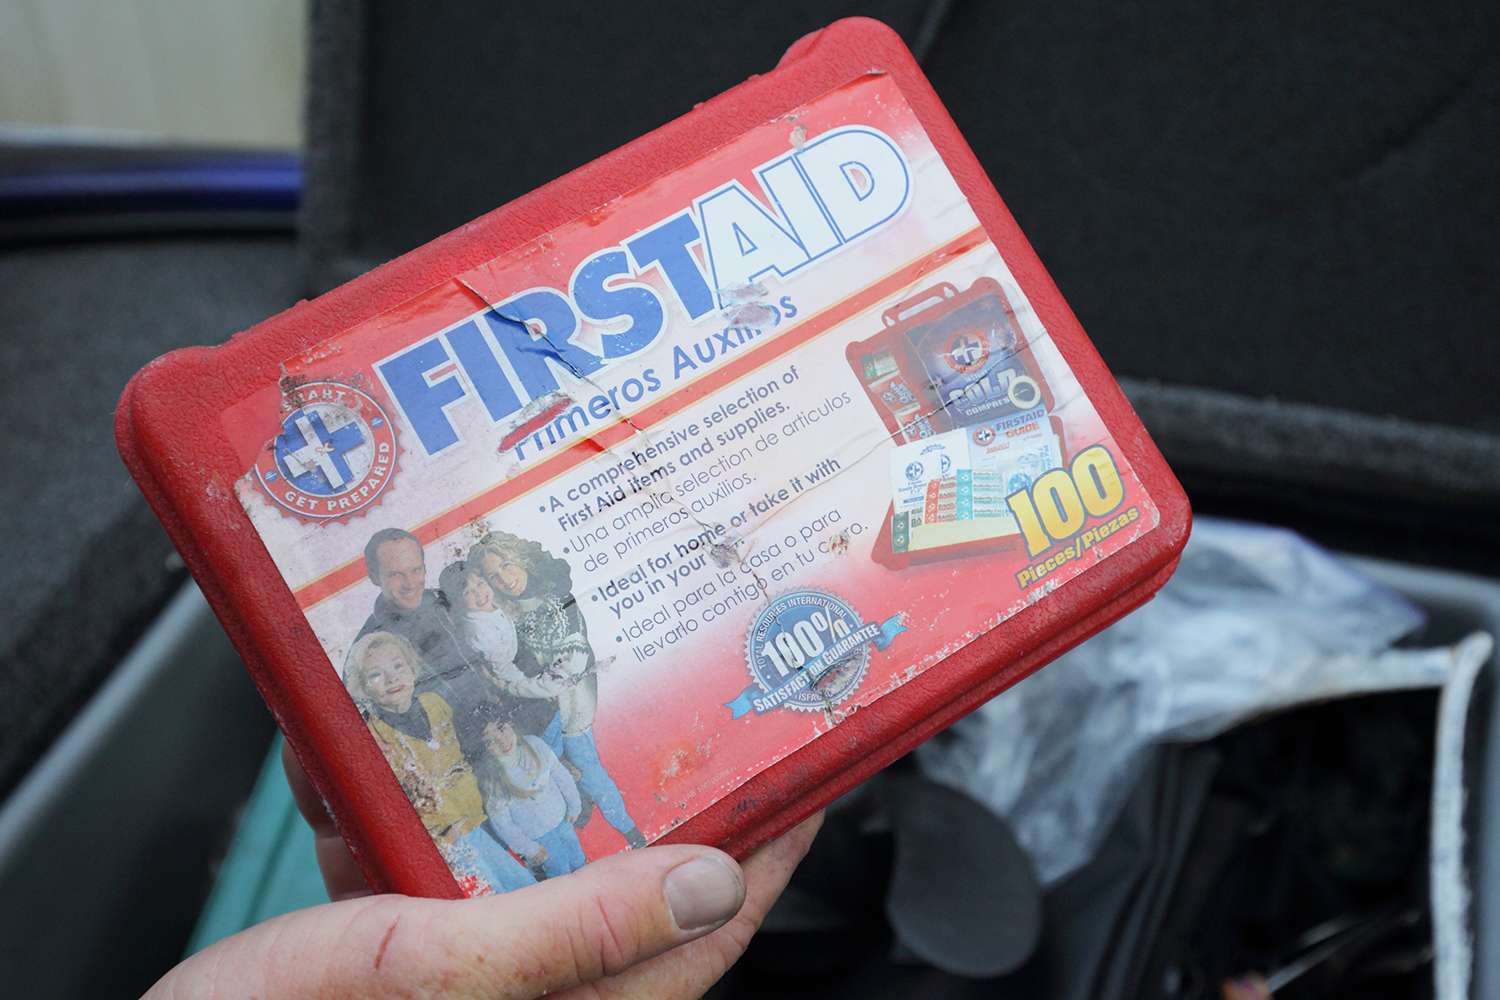 For human care, Bertrand packed the ever-important (and compact) first aid kit.